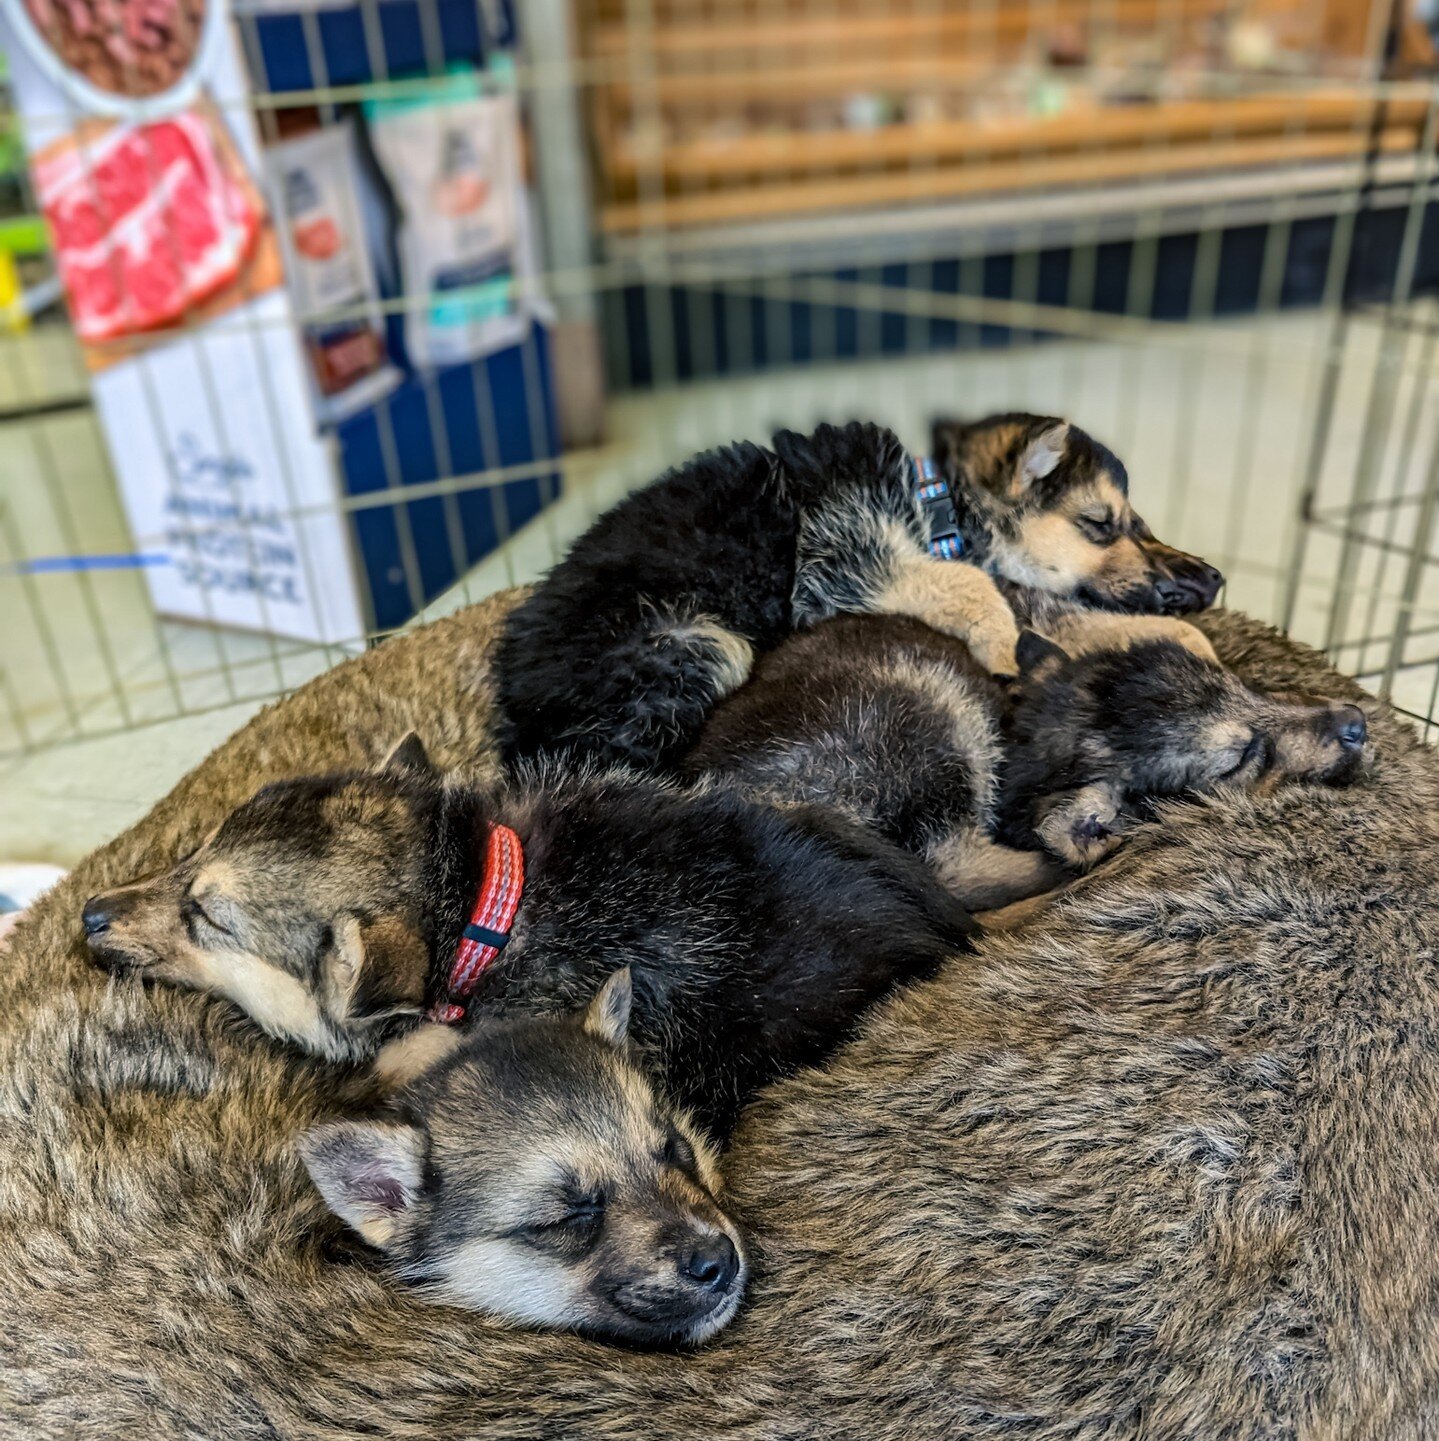 Don't have a pic of Gwen holding the German Shepard puppies at Critters &amp; Co last week because they were all sleeping in an adorable pile when we came in⁠
⁠
⁠
#farmsanctuary #animalsanctuary #rescue #friendsnotfood #herewithusnotforus #govegan #g